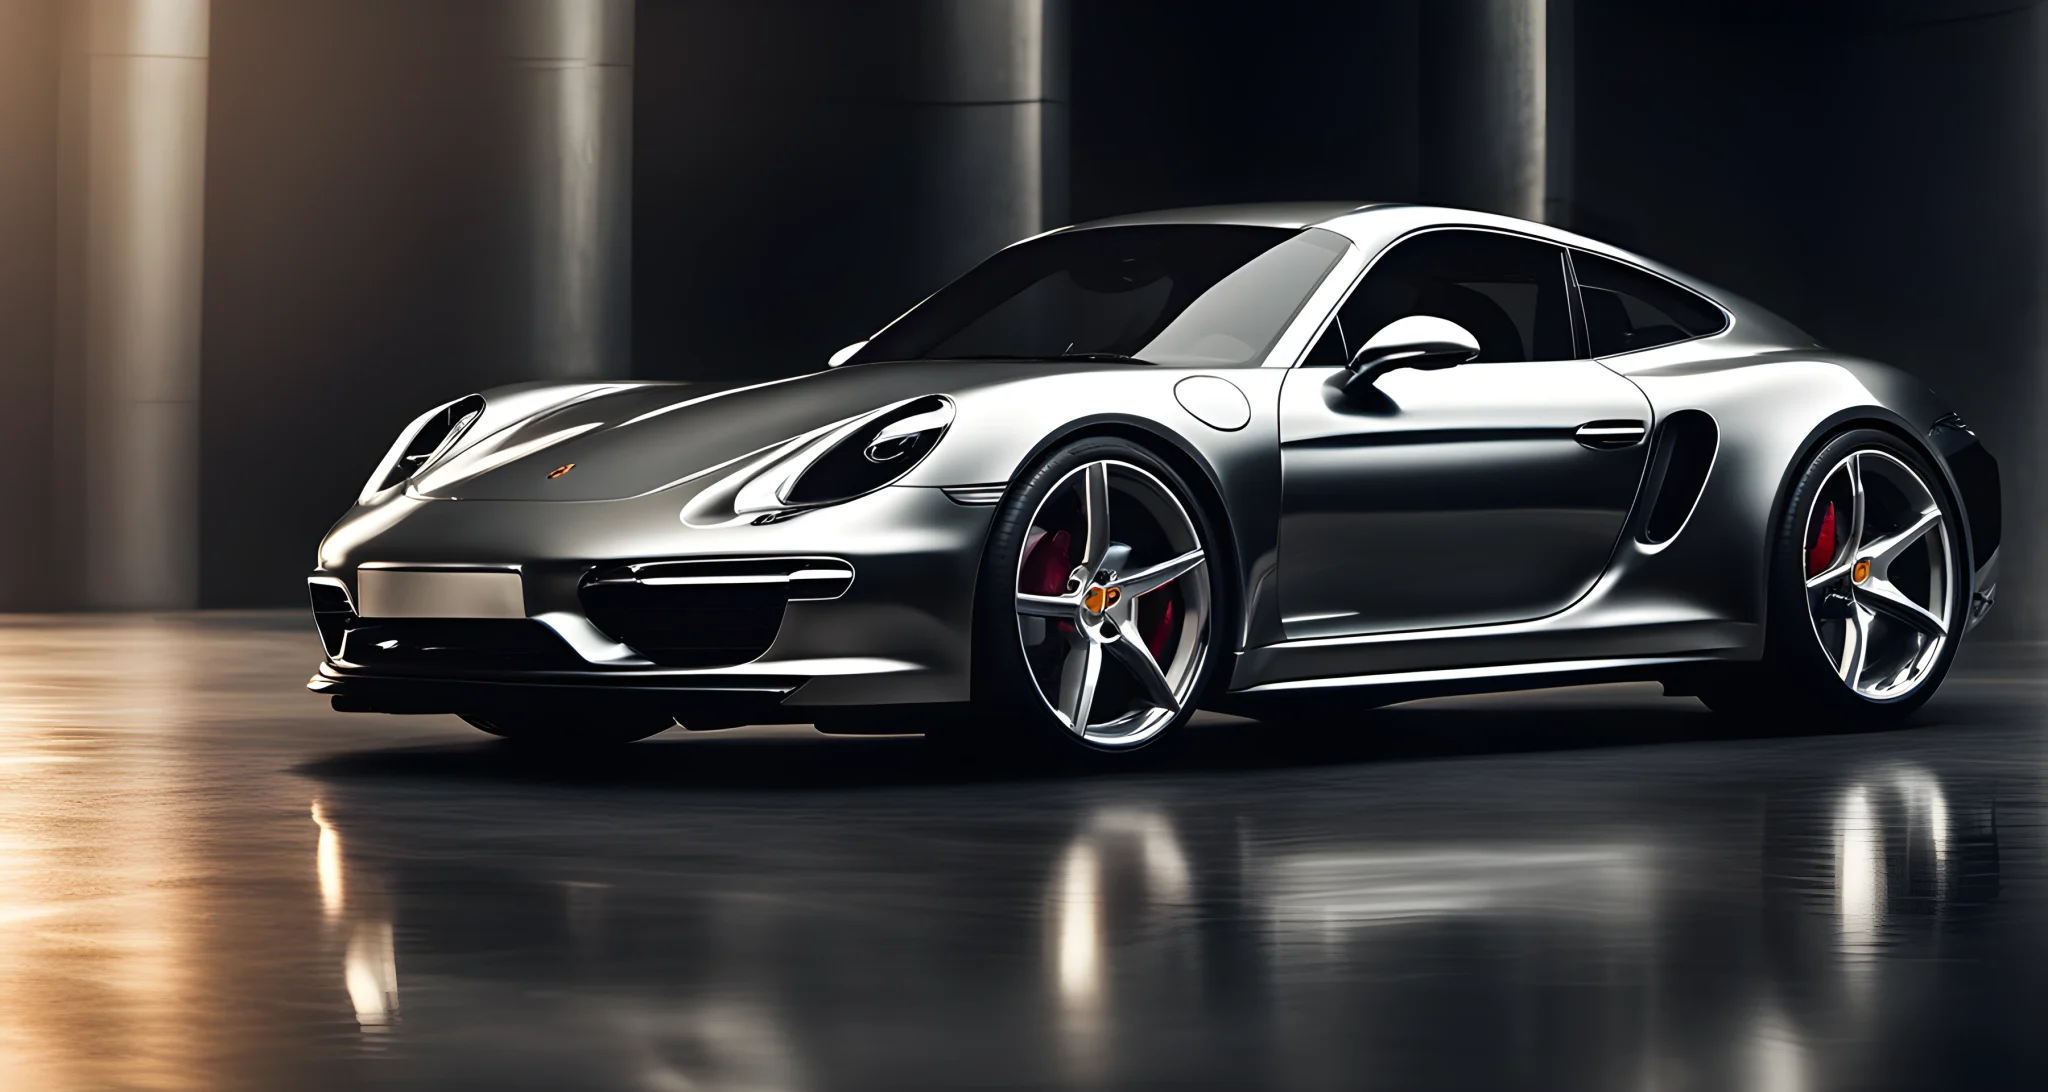 The image features a sleek and modern Porsche sports car, with a shiny, metallic finish and aerodynamic design.